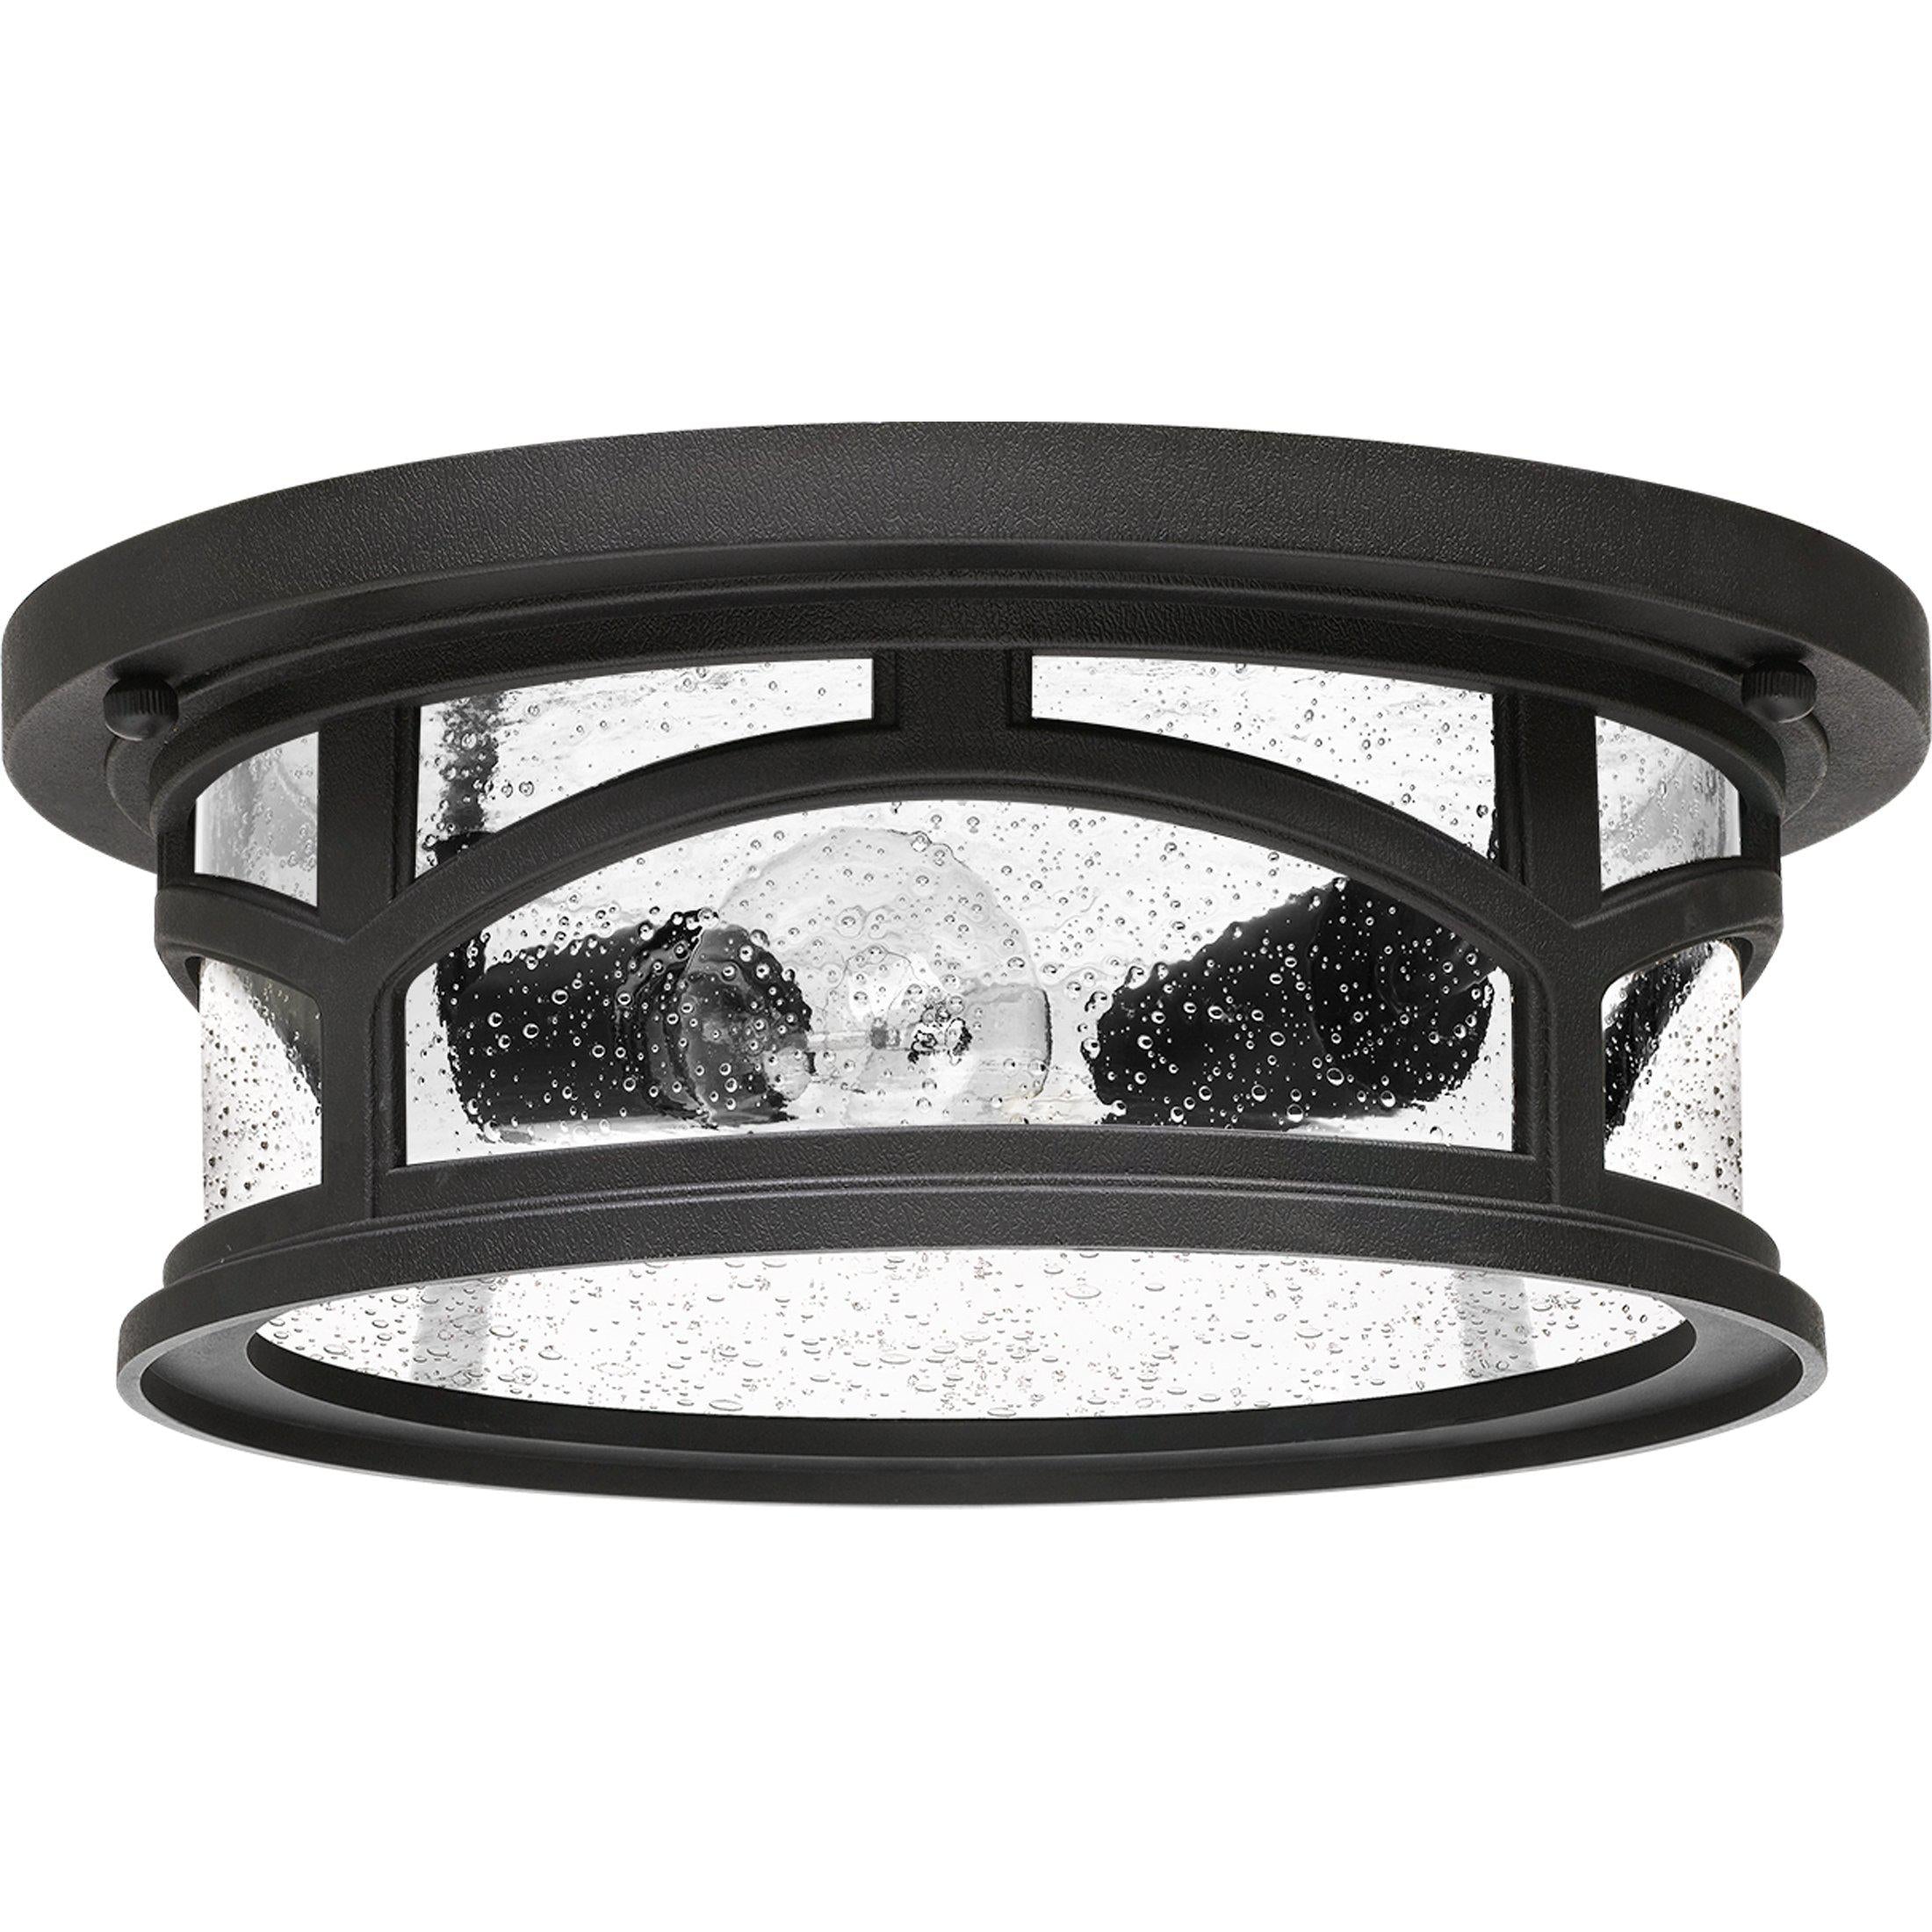 Quoizel  Marblehead Outdoor Lantern, Flushmount Outdoor l Wall Quoizel   